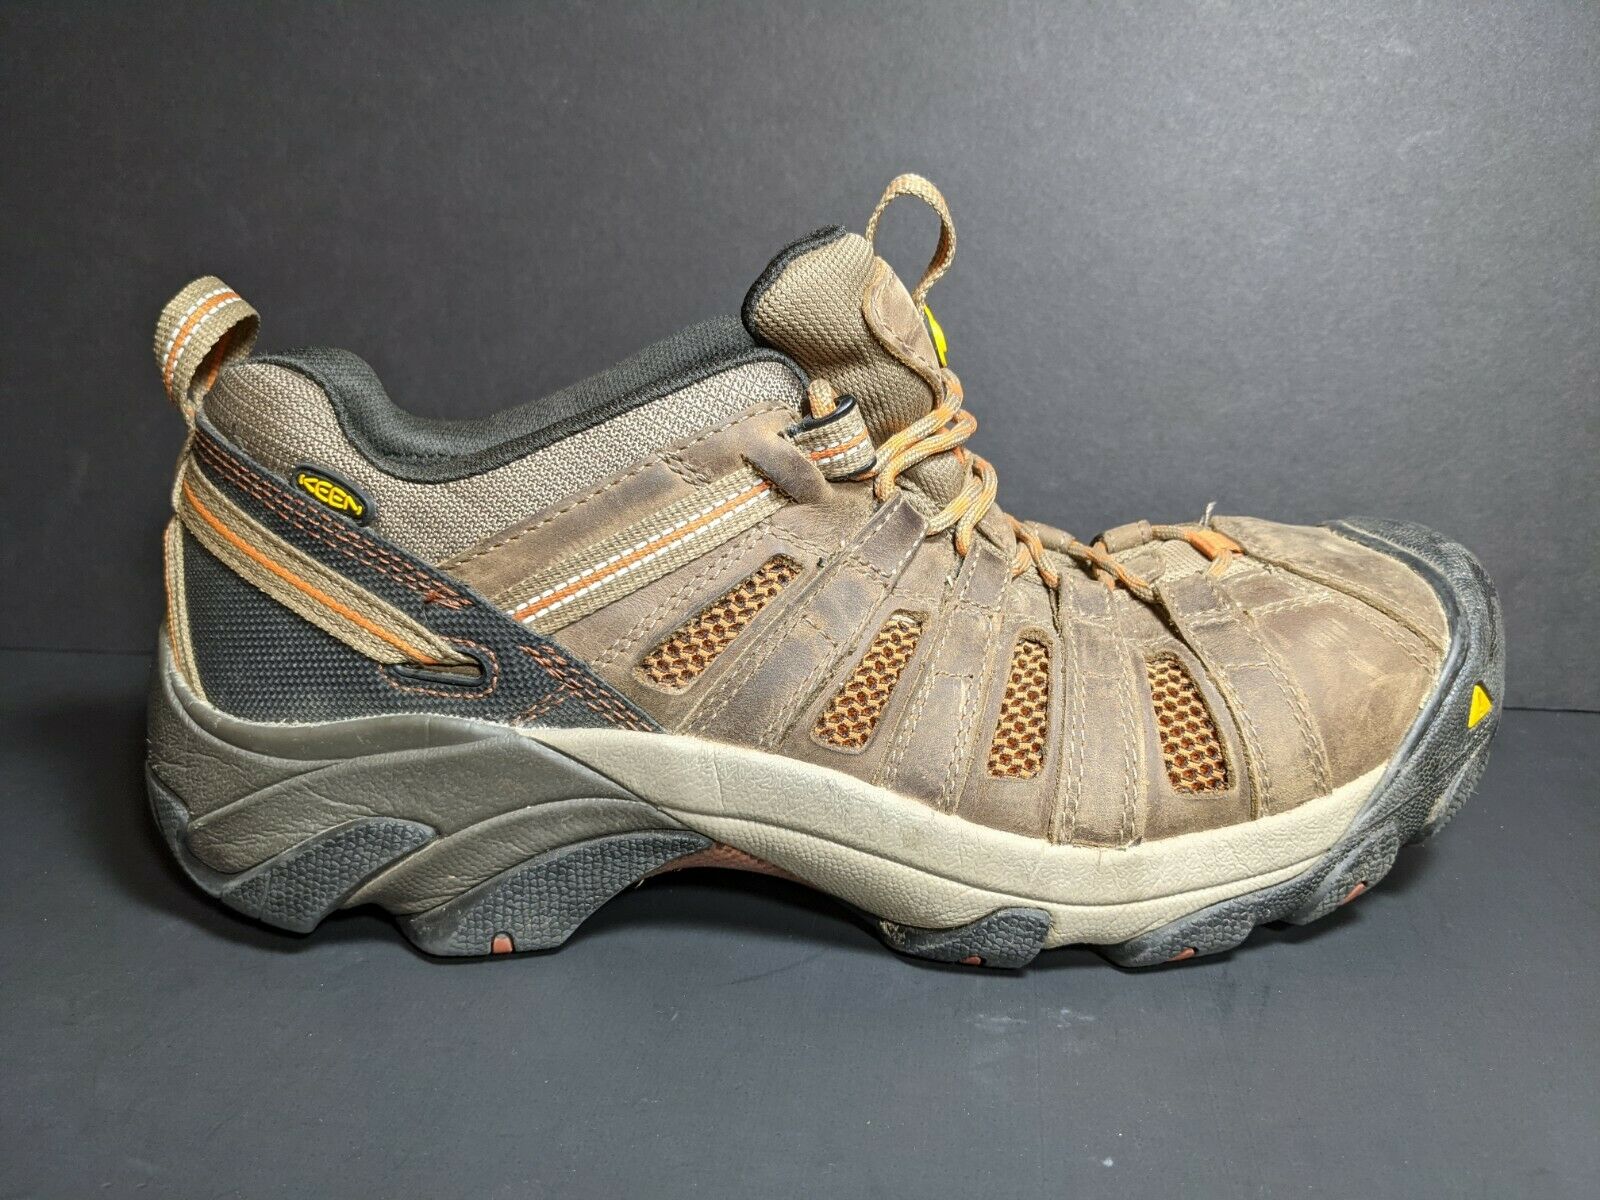 Keen Safety Toe Work Shoes F2413-11 Men's Size 12 D